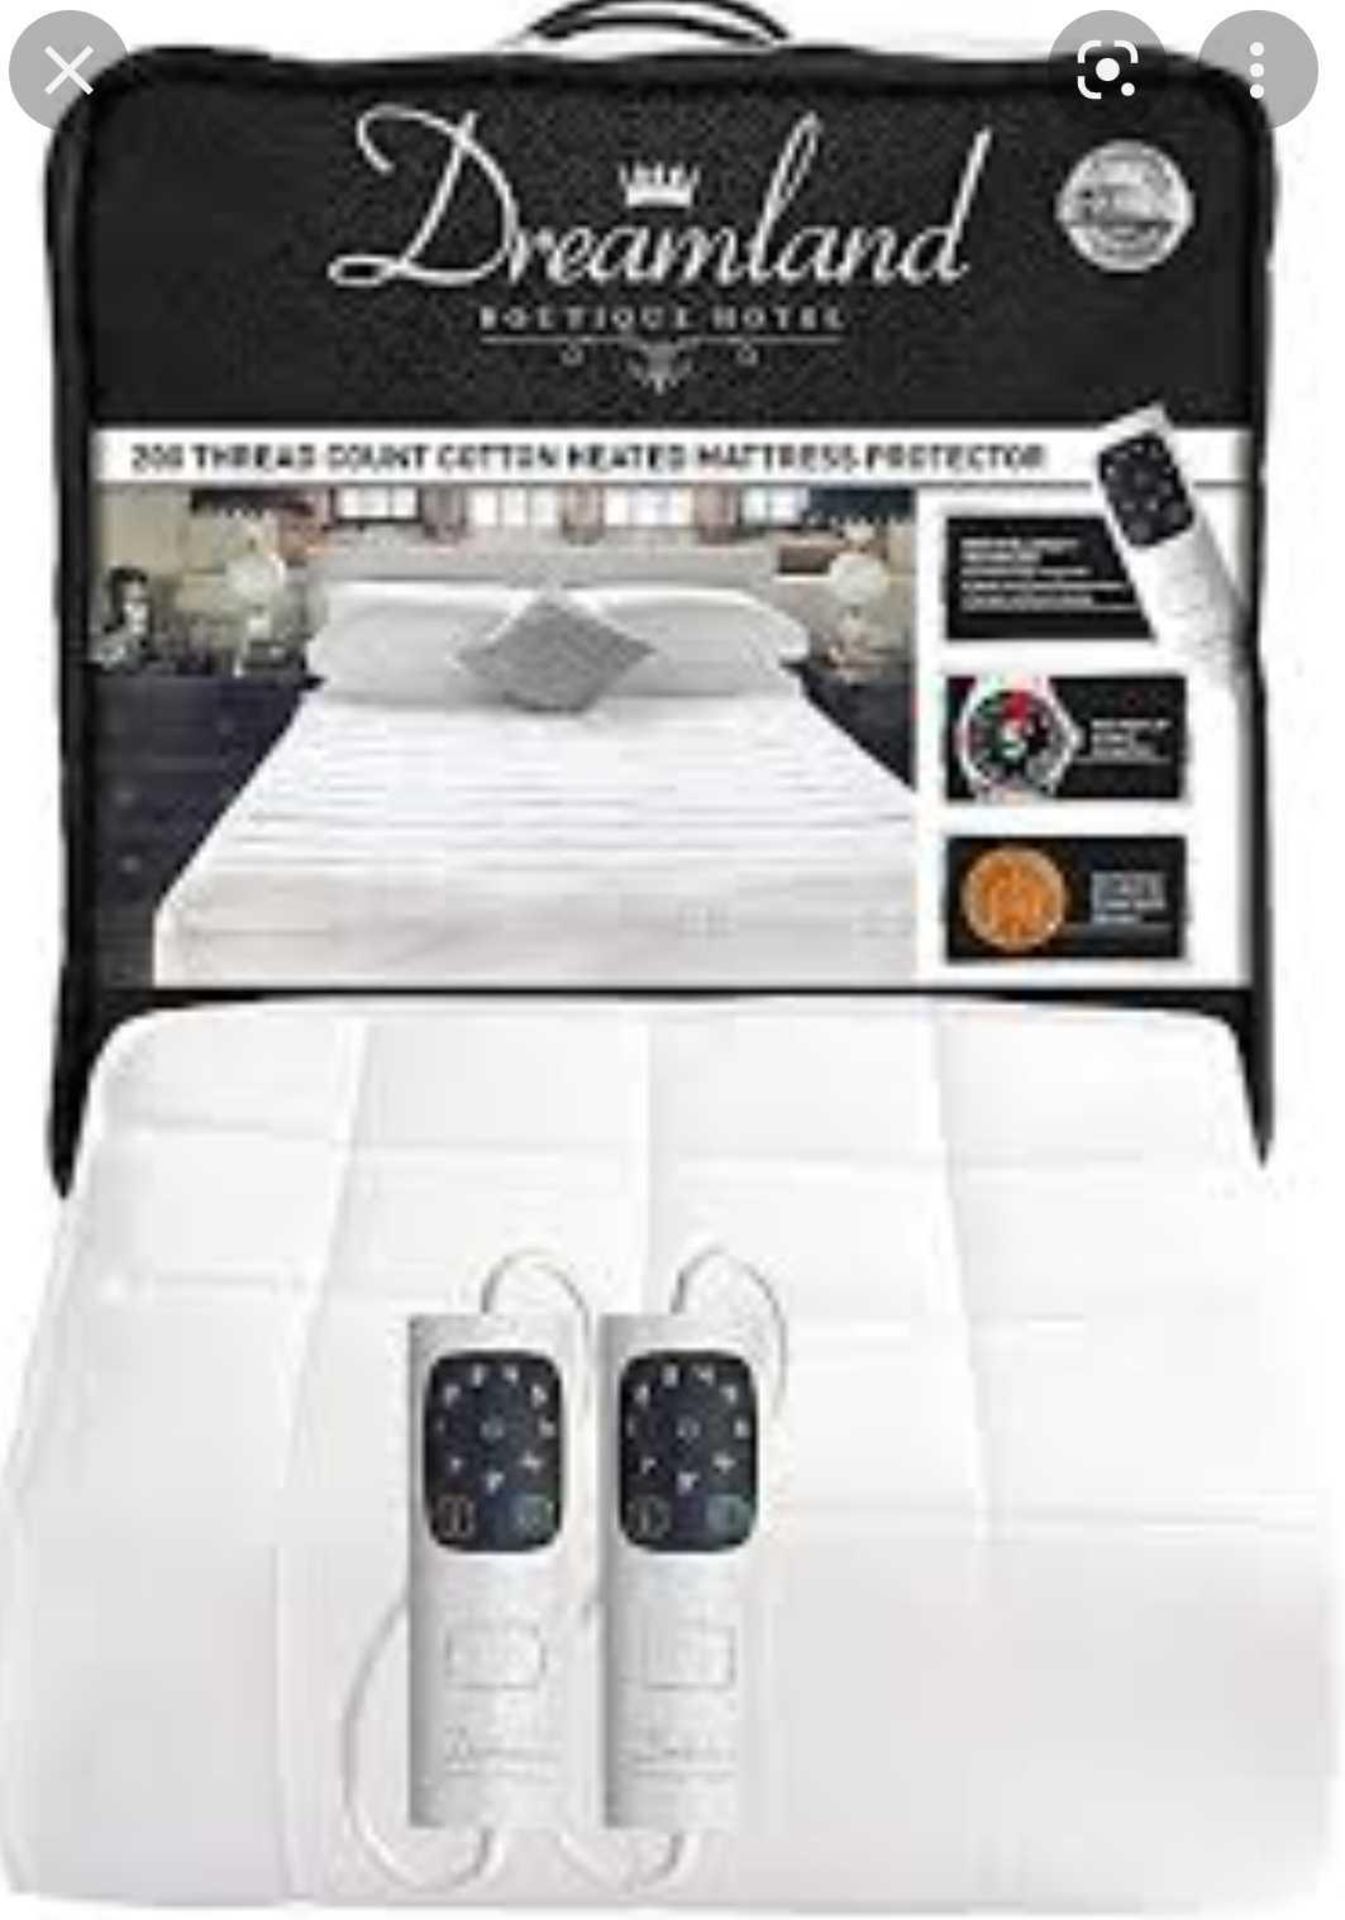 RRP £105 Bagged Dreamland 200 Thread Count Intelliheat Cotton Heated Mattress Protector - Image 2 of 2